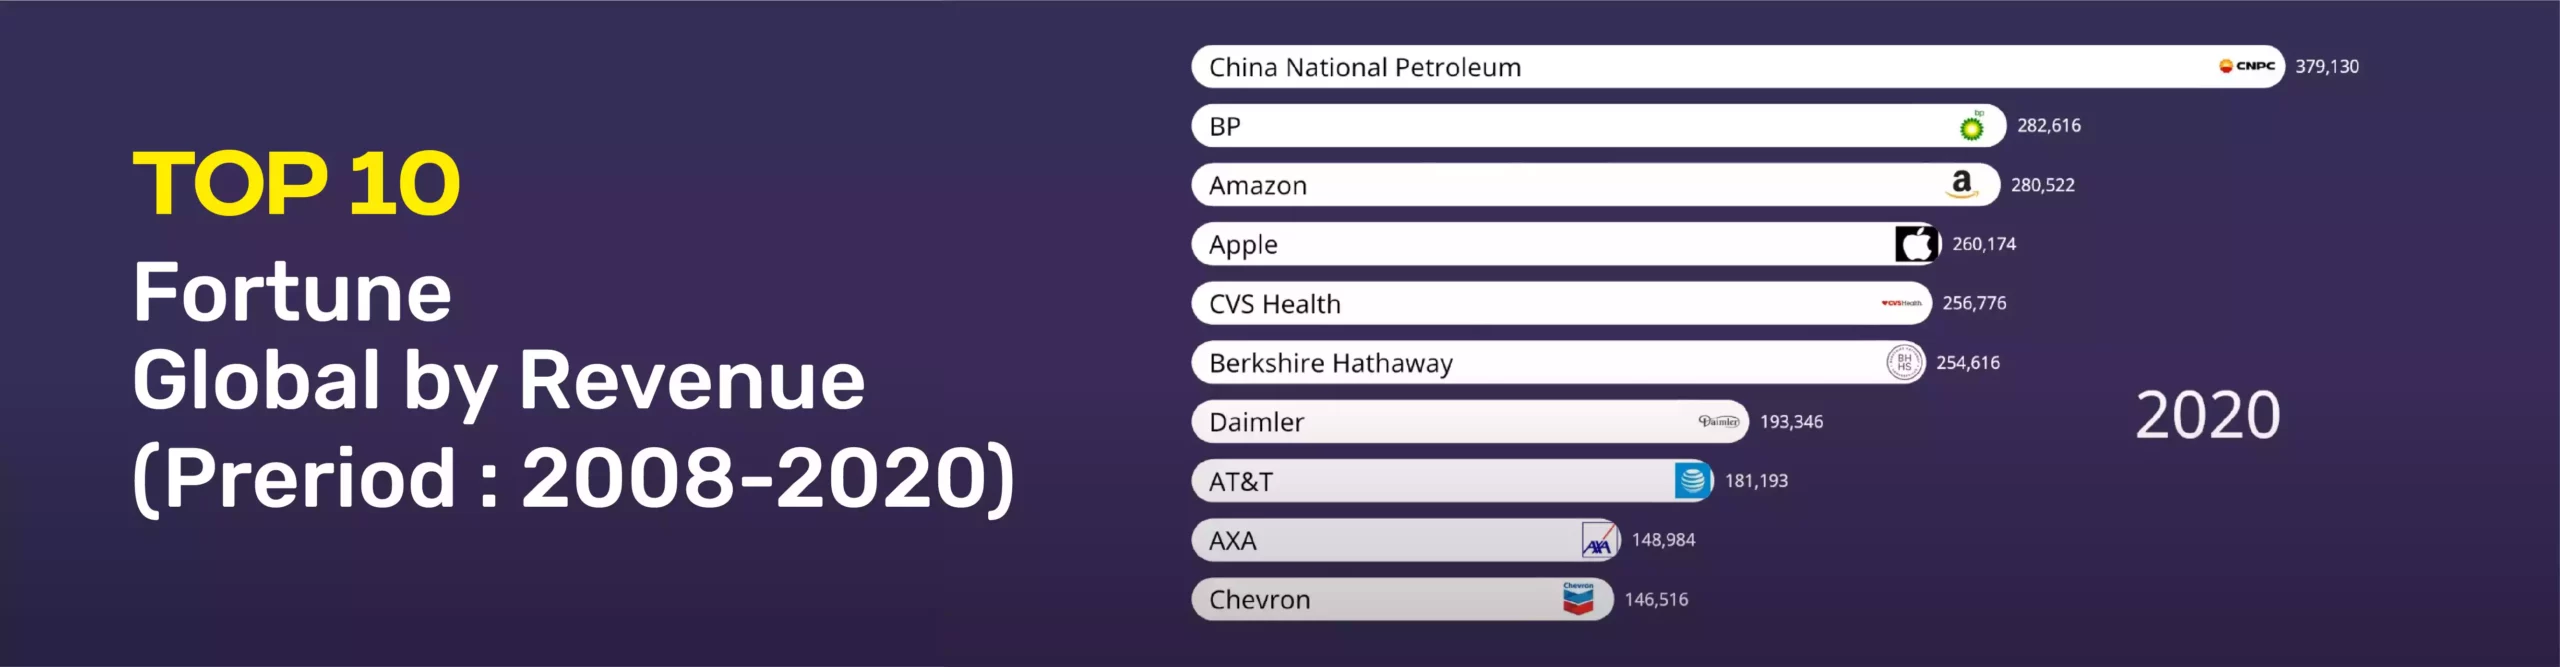 Top 10 fortune global companies by revenue